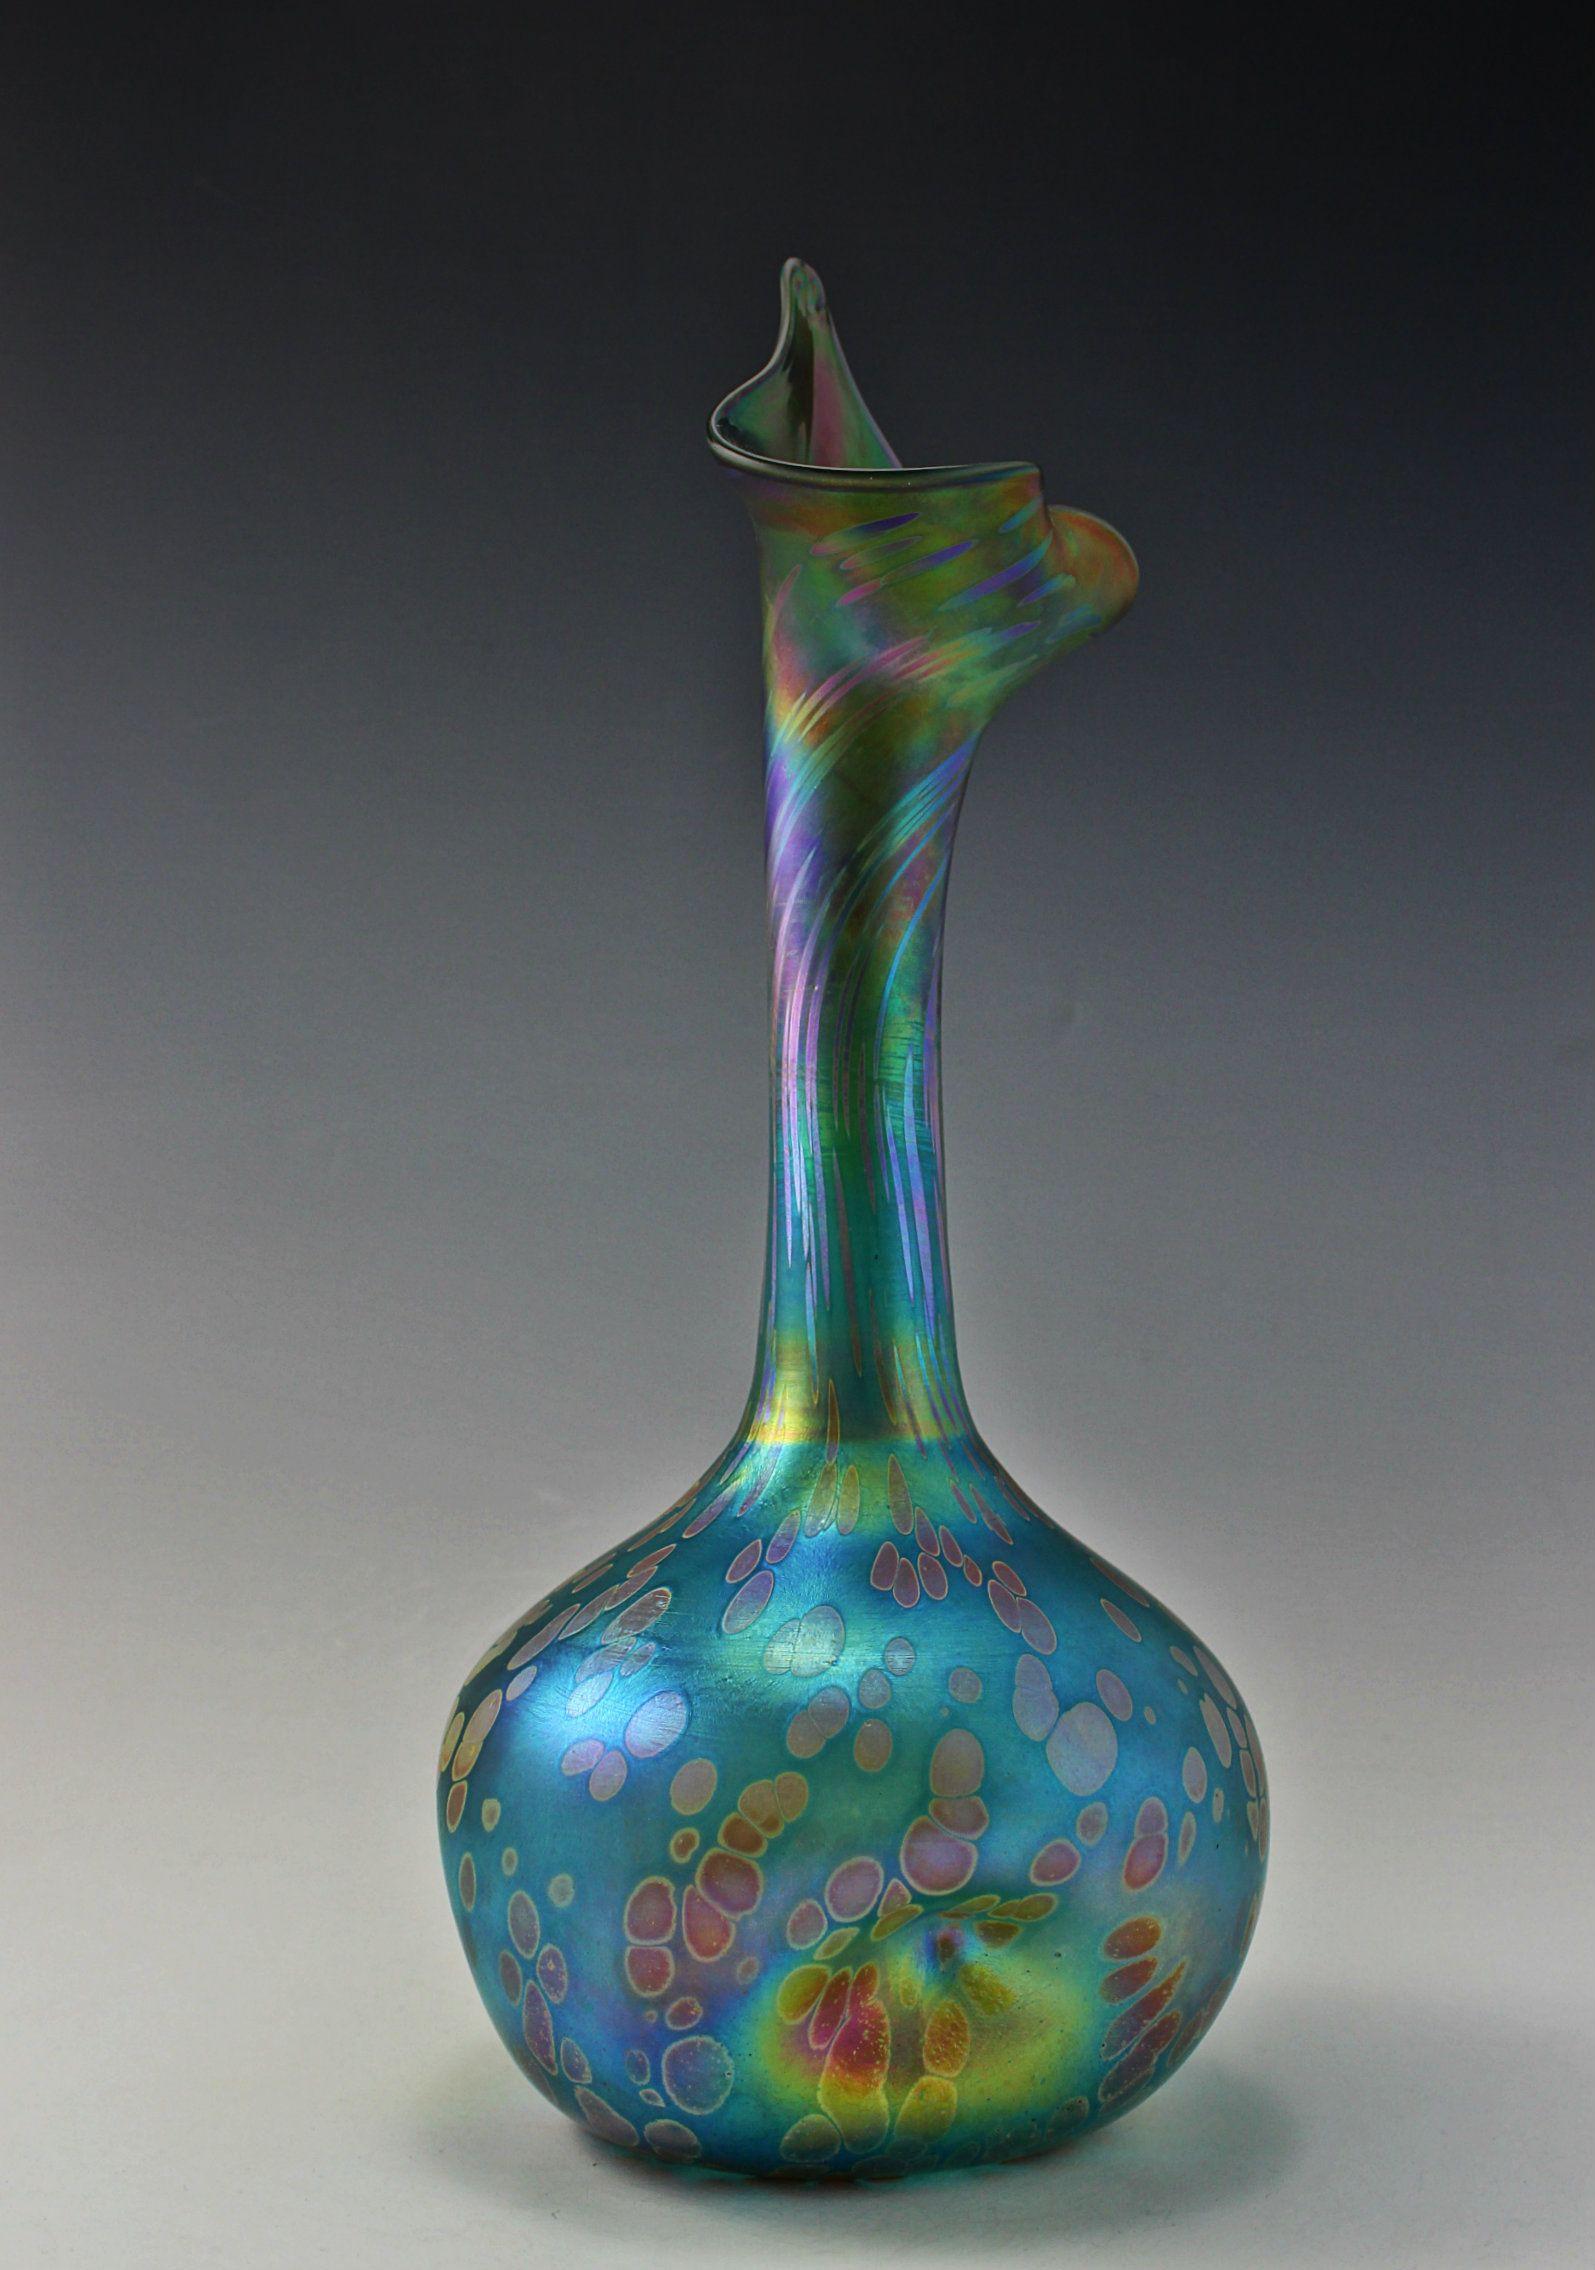 23 Lovable Tiffany Vases for Sale 2023 free download tiffany vases for sale of 10 bohemian art glass czech iridescent vase for sale http stores for bohemian art glass czech iridescent vase for sale http